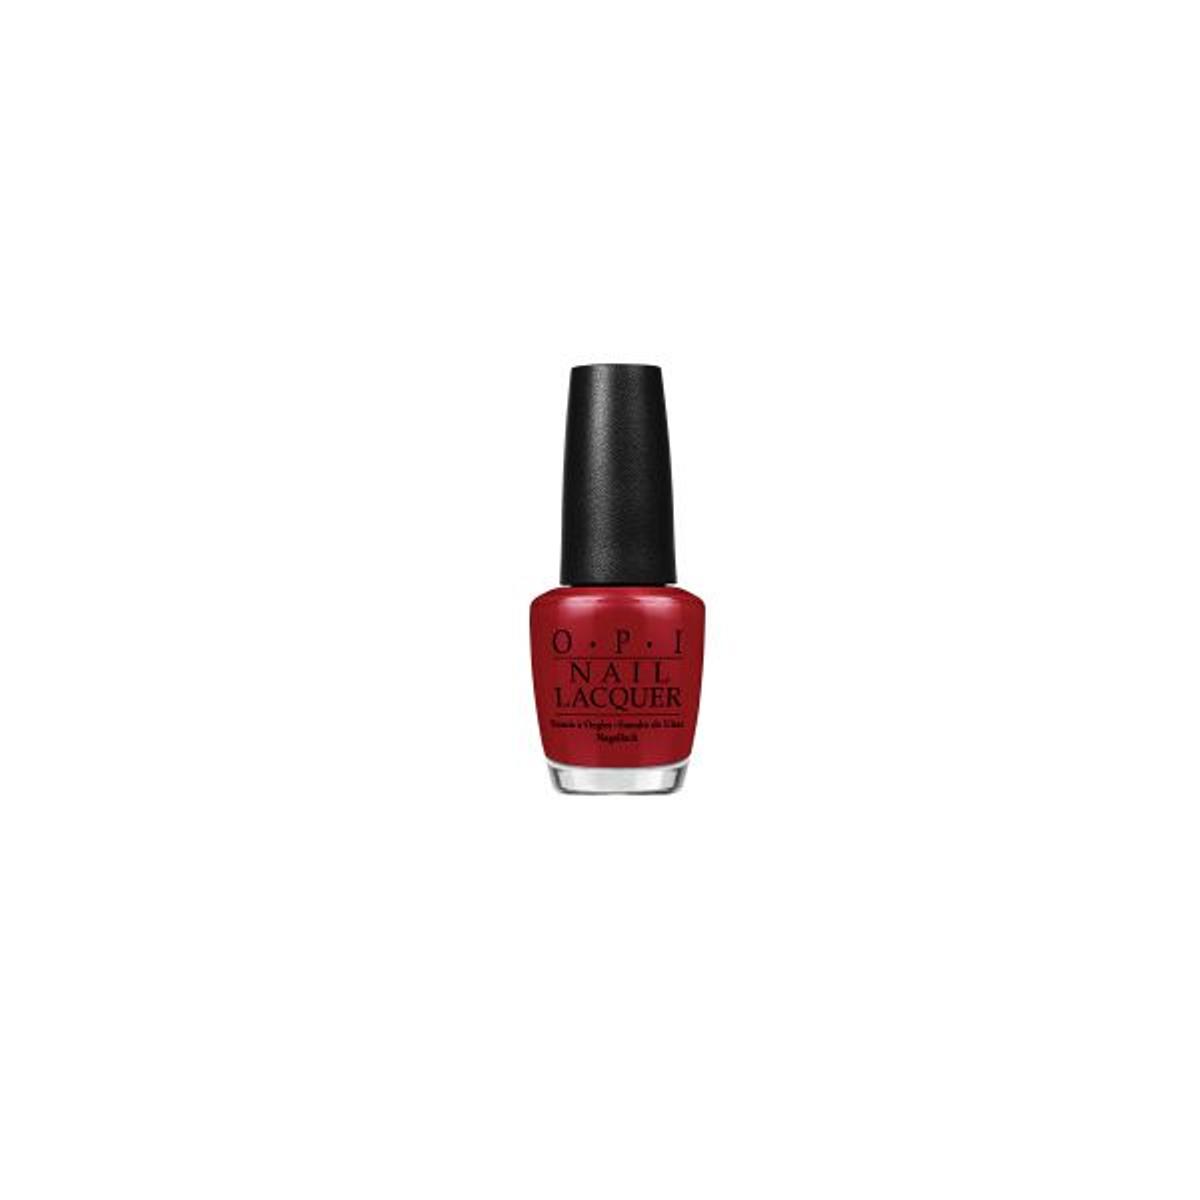 Neceser otoño: Amore at the grand canal, OPI